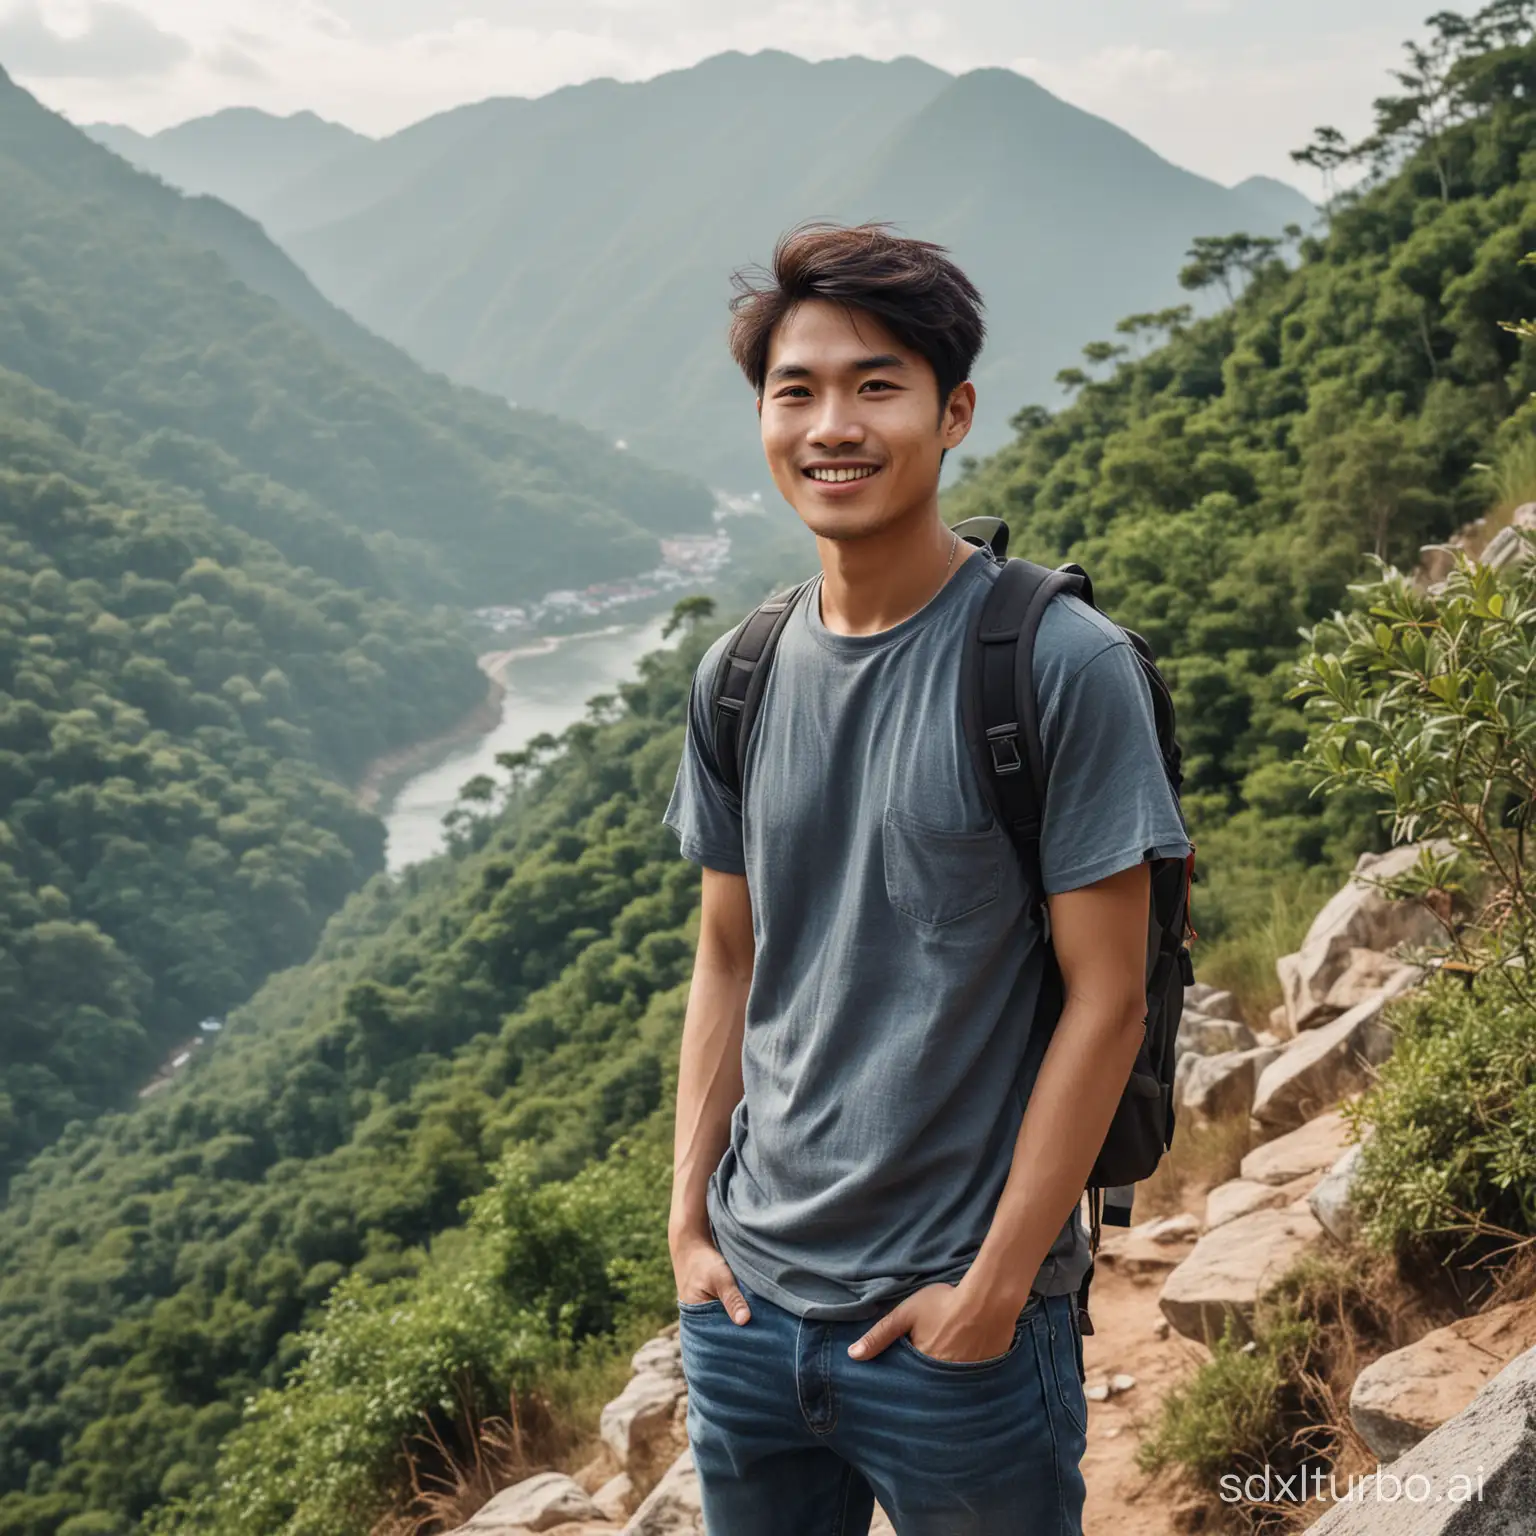 A 25 year old Asian young man, standing on a mountain hill, wearing a T-shirt, jeans, backpack, high cliff, lots of trees,faint smile, pose